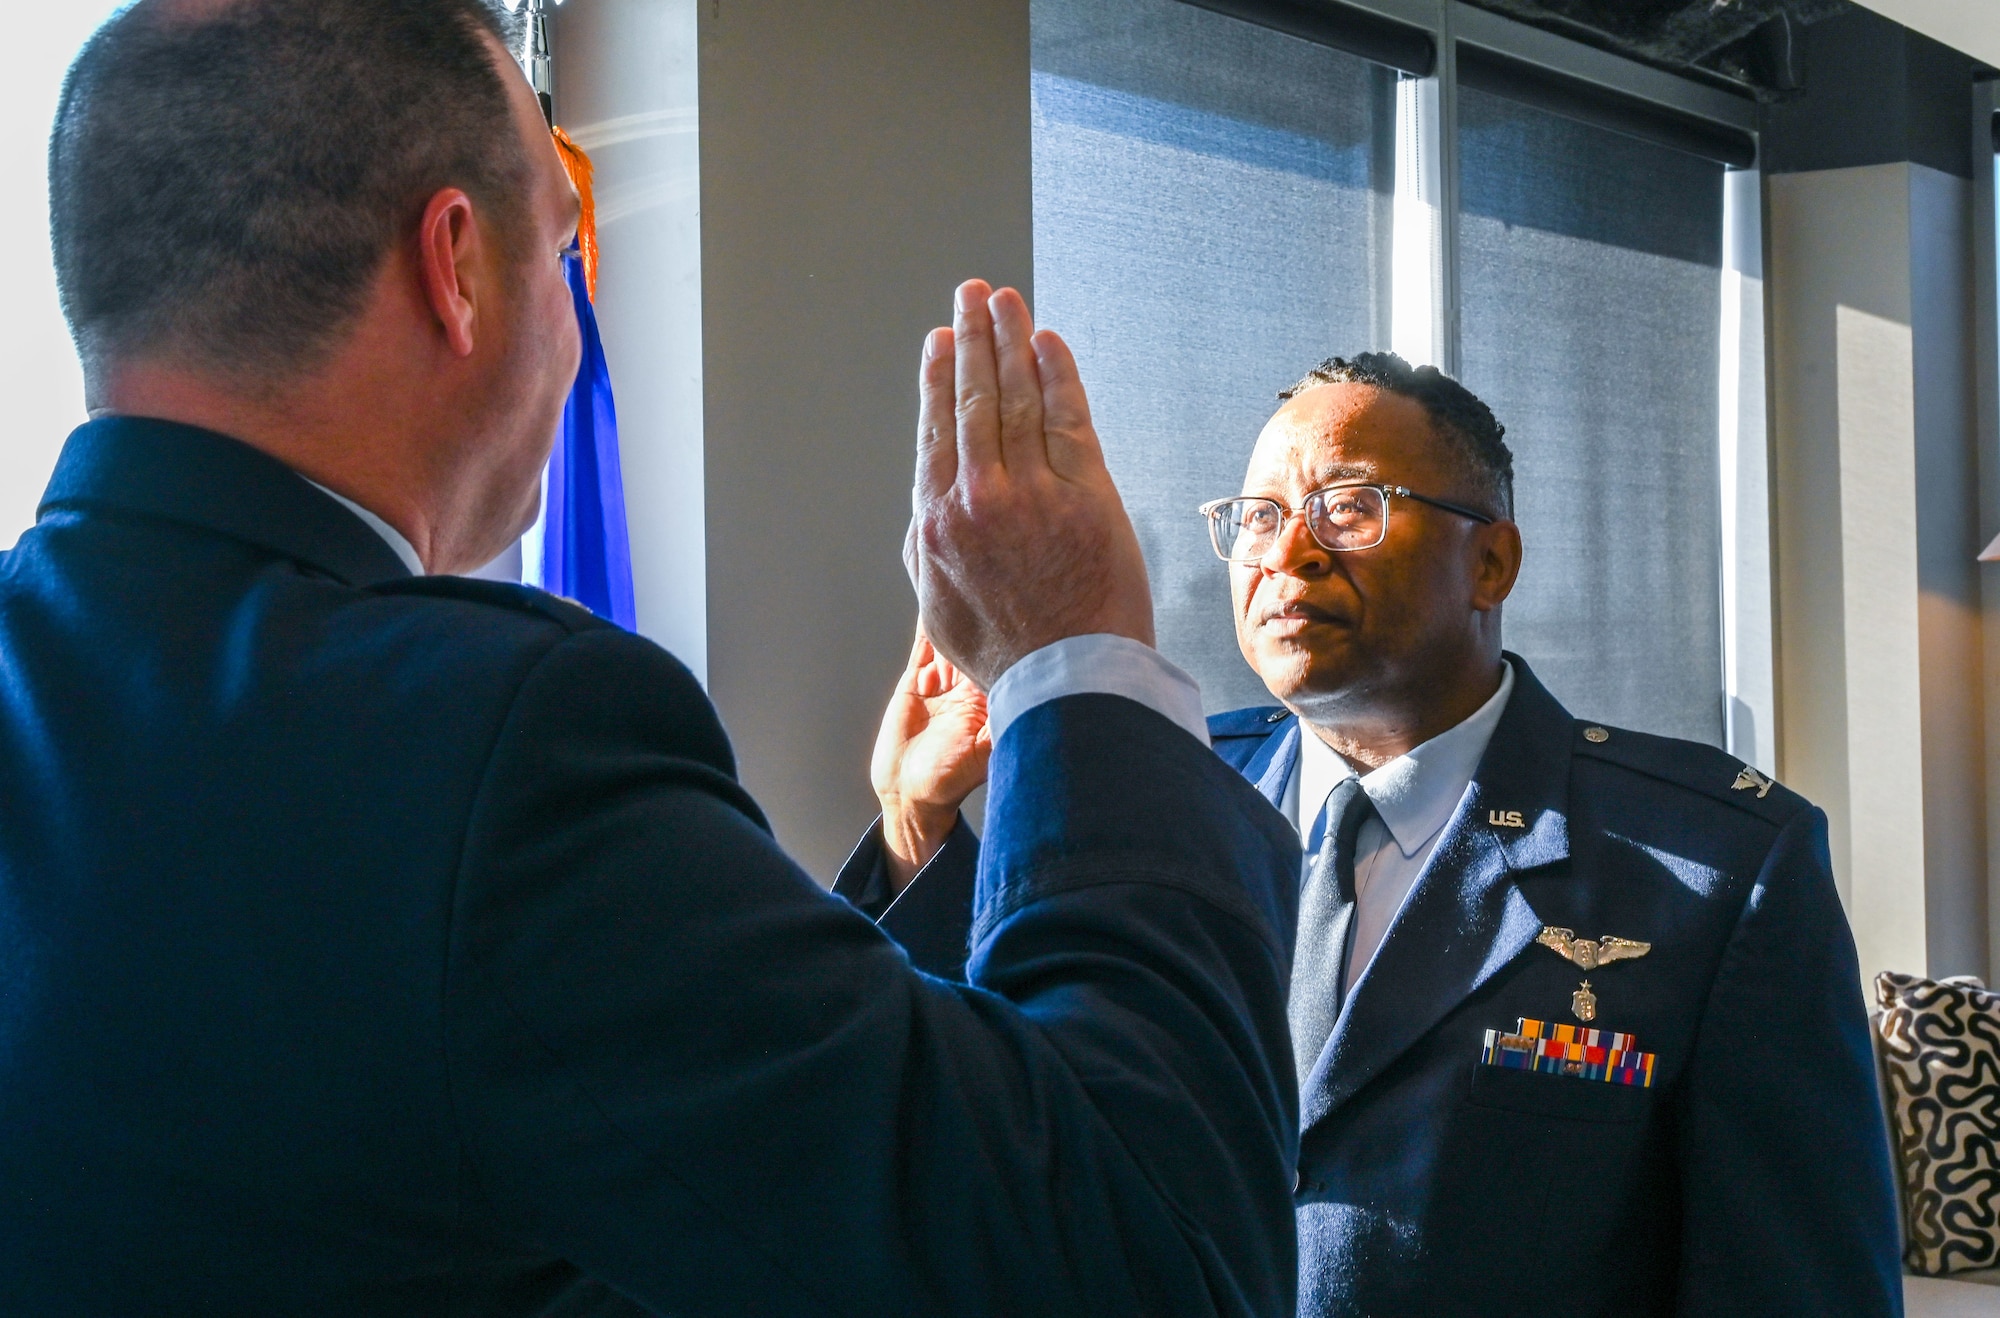 Col. Michael Parks, 507th Air Refueling Wing commander, administers the oath of office to Col. Alvin Bradford, 507th Medical Squadron commander, during a promotion ceremony September 30, 2022, Oklahoma City, Oklahoma. (U.S. Air Force photo by 2nd Lt. Mary Begy)